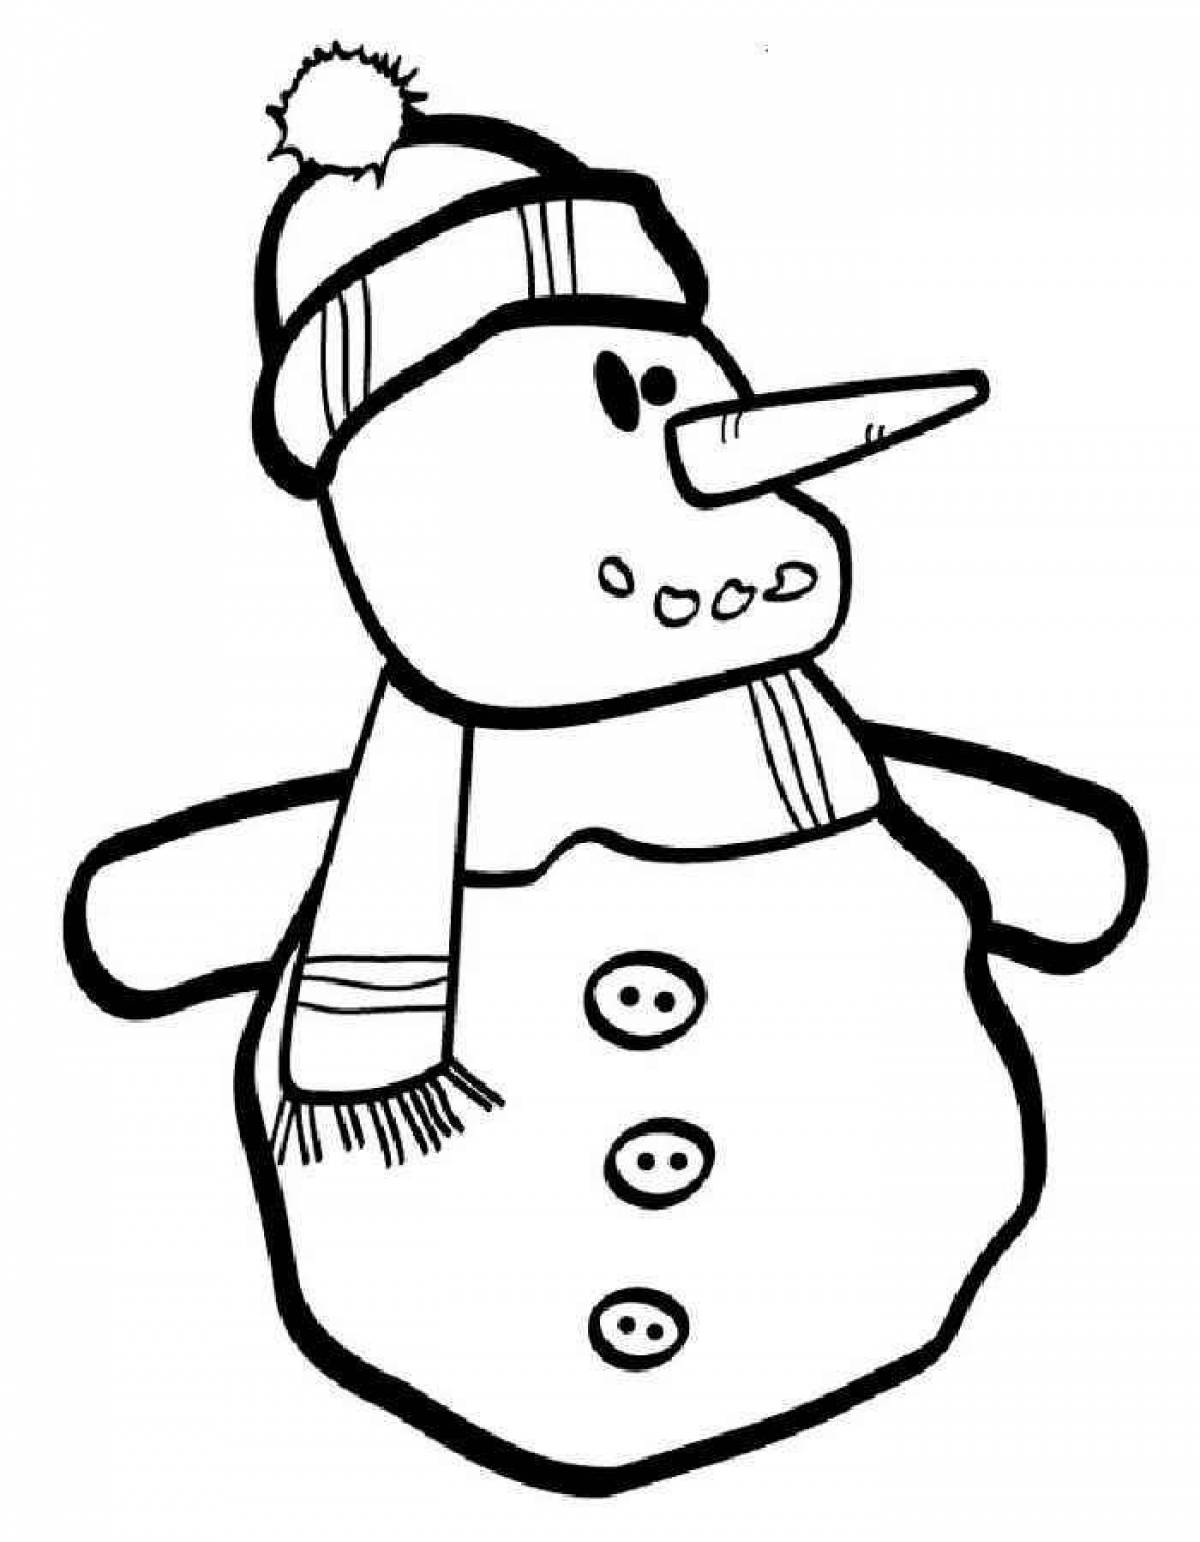 Drawing of a twinkling snowman